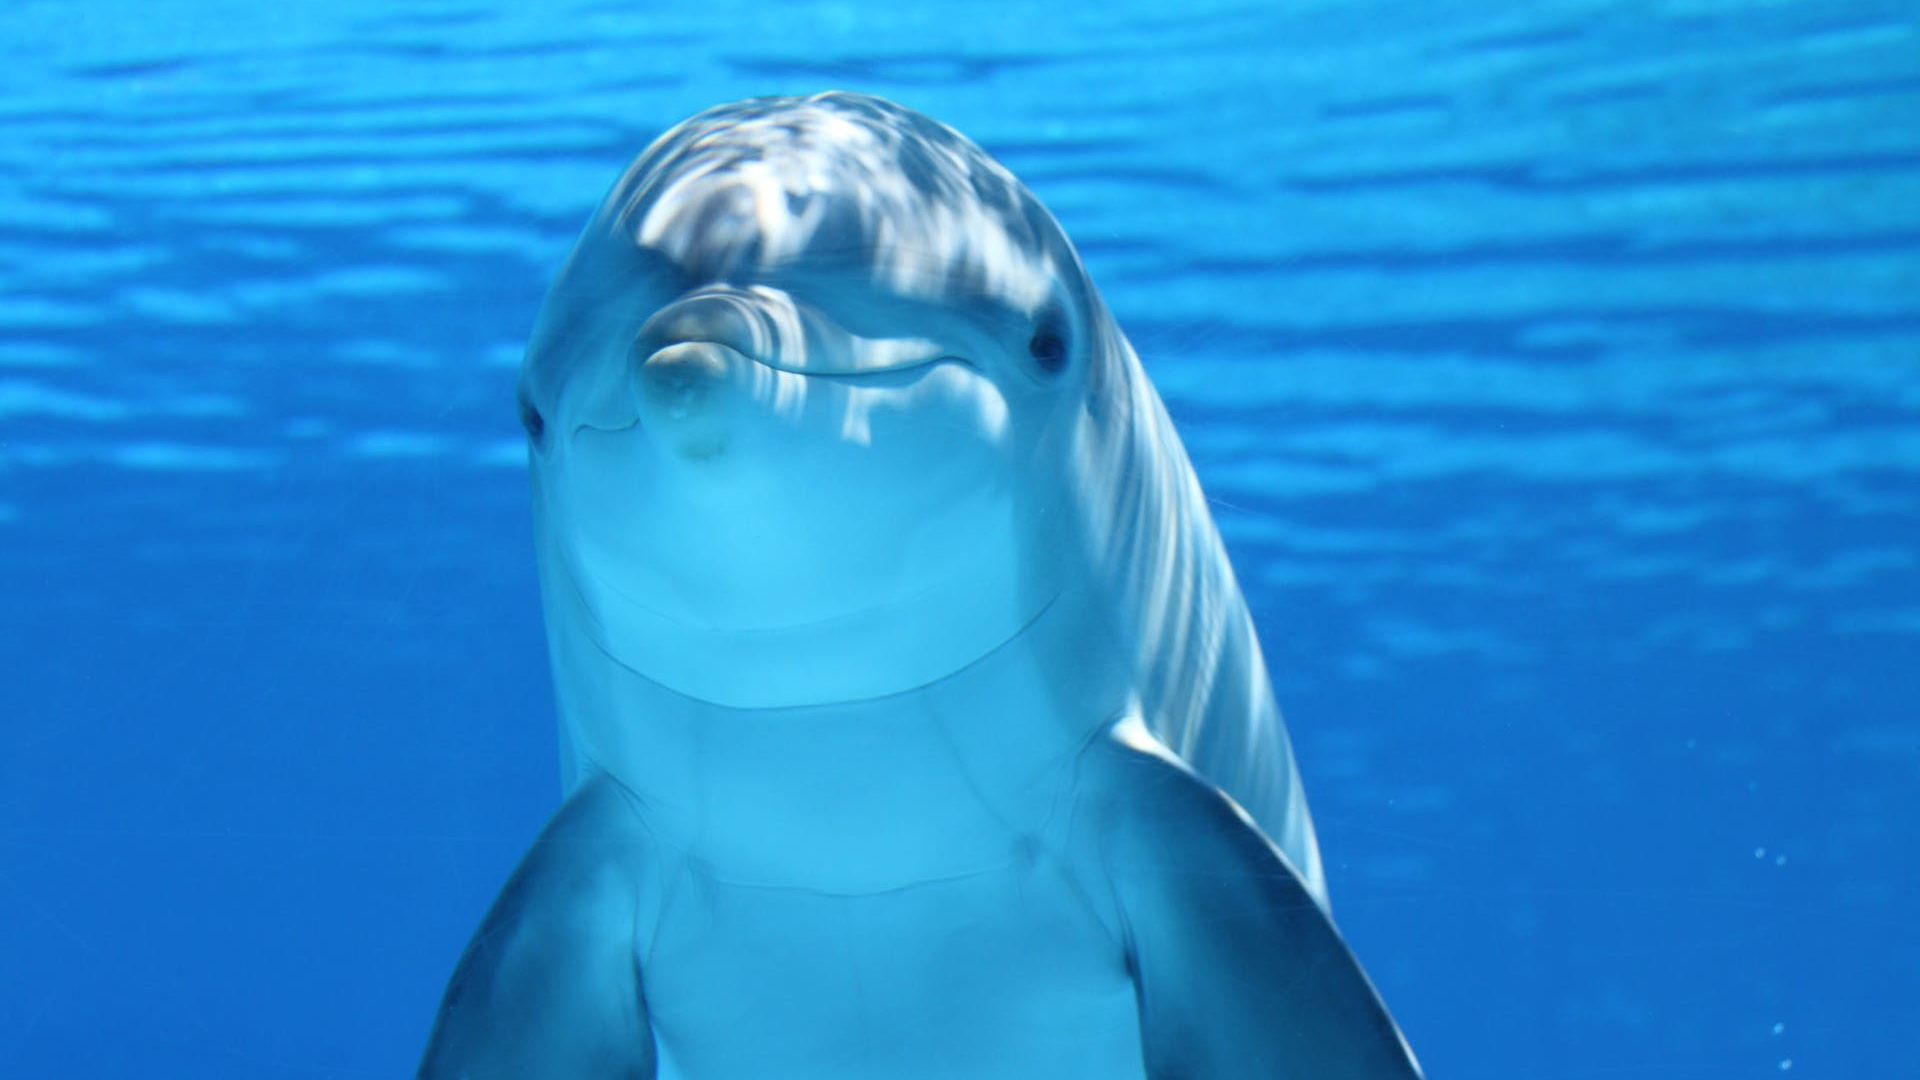 Dolphins can detect electric fields